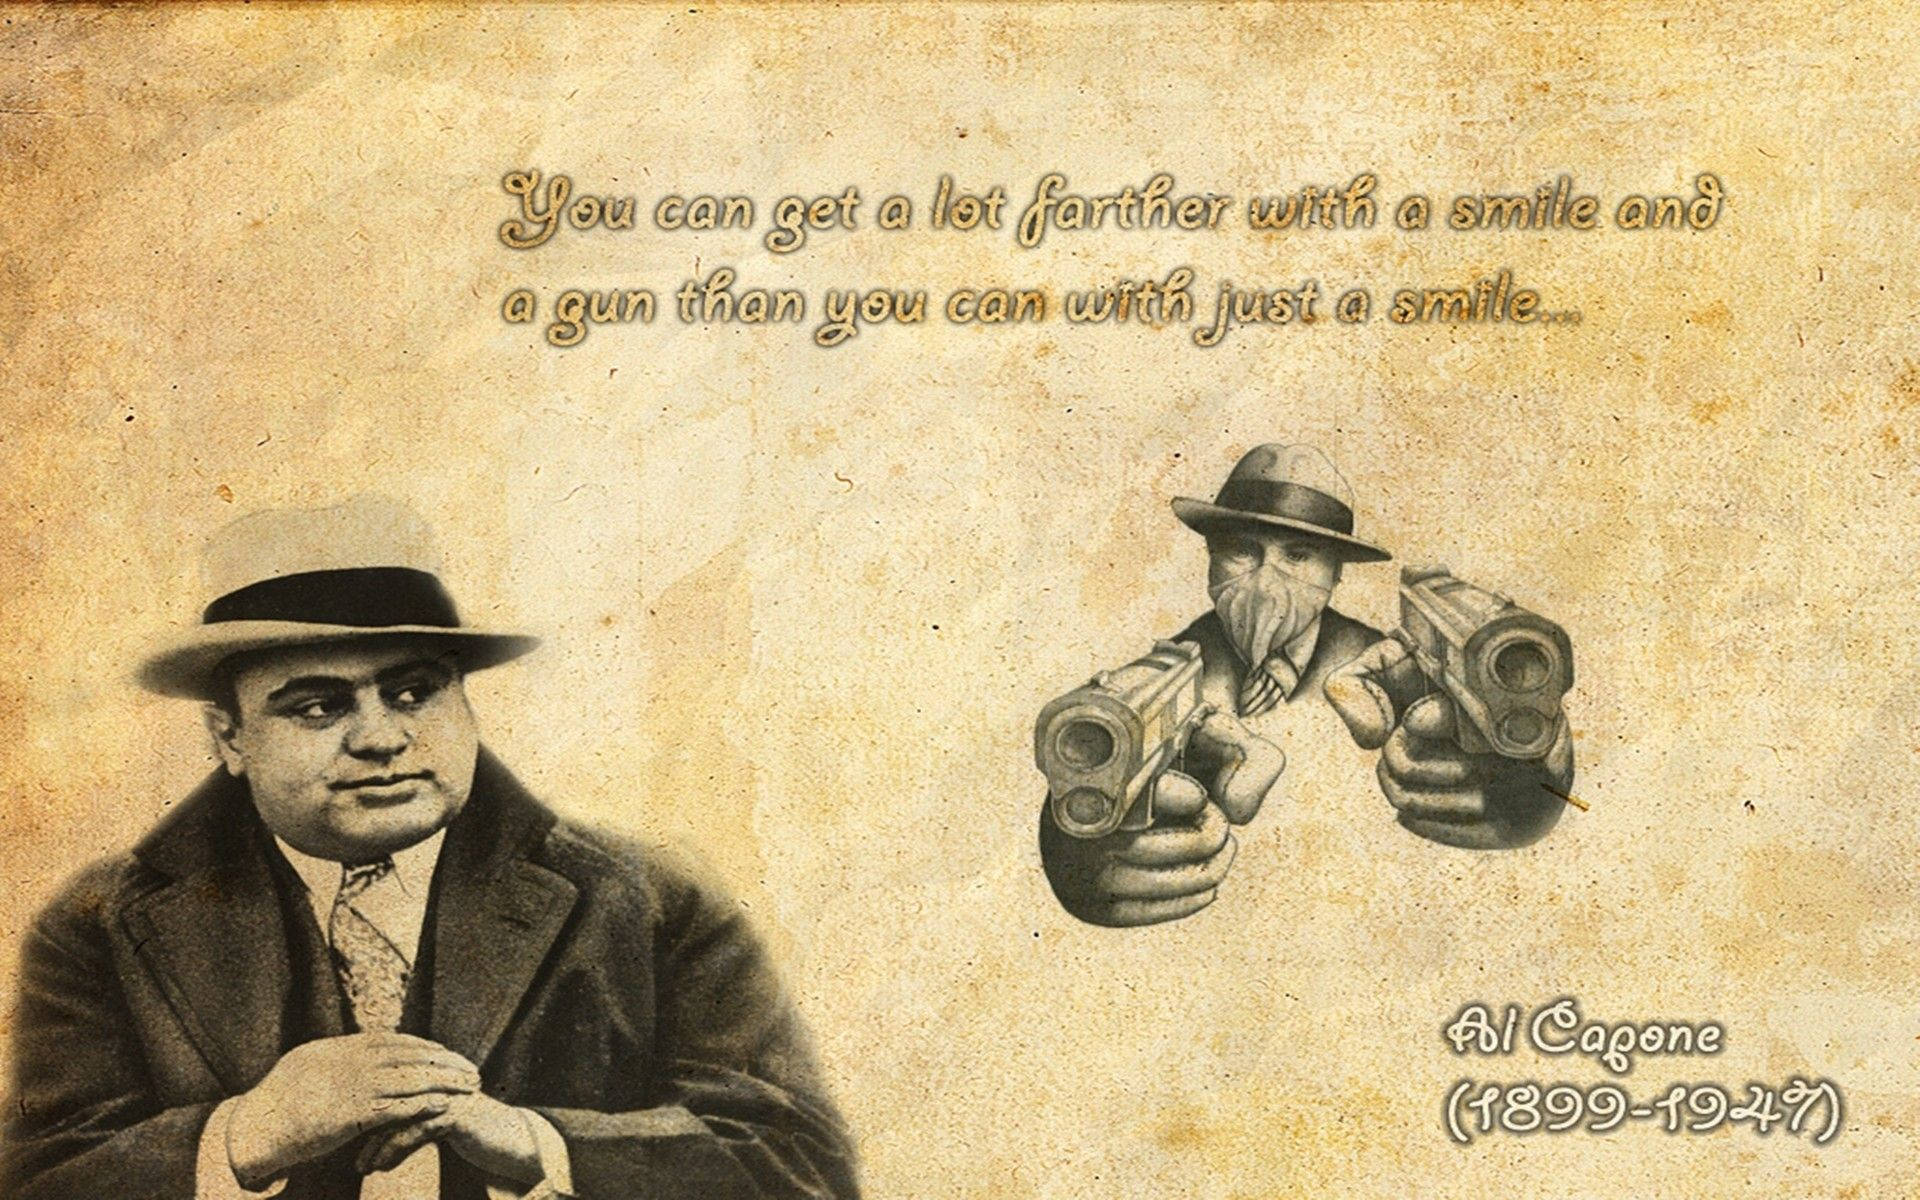 Al Capone Gangster Boss Quotes Background